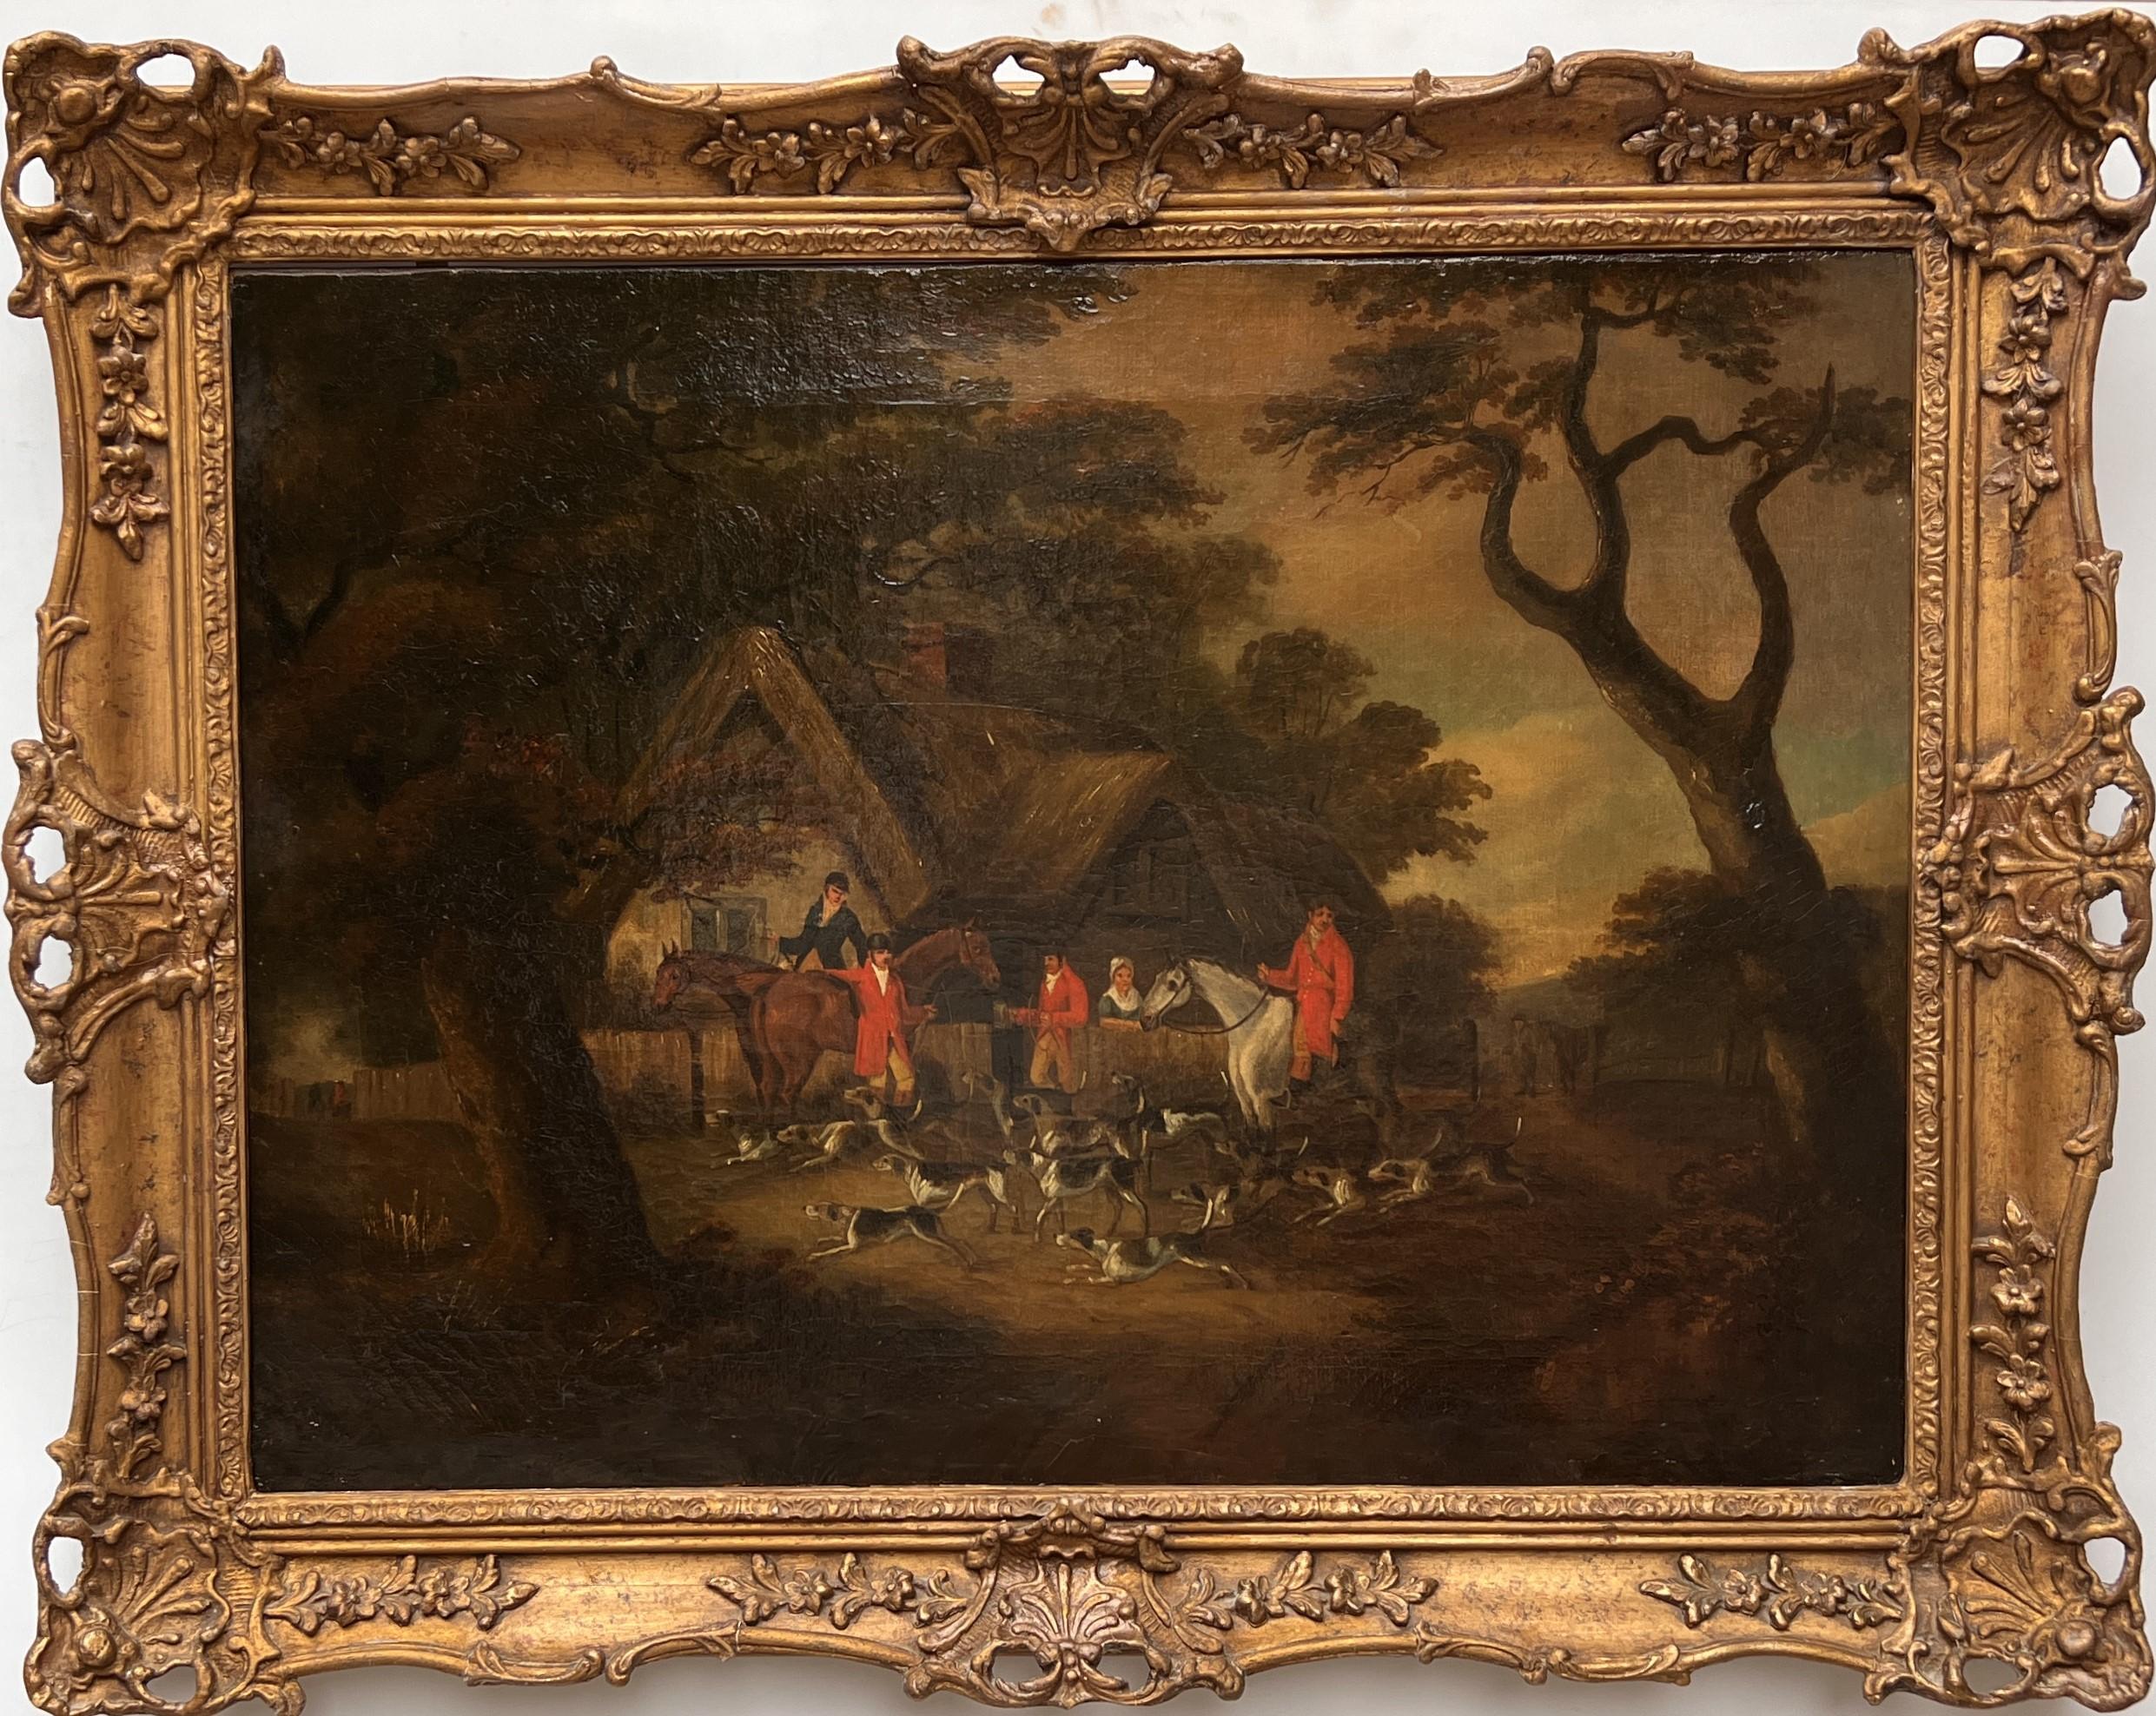 Unknown Figurative Painting - Antique 19century or earlier English School oil painting on canvas Hunting scene